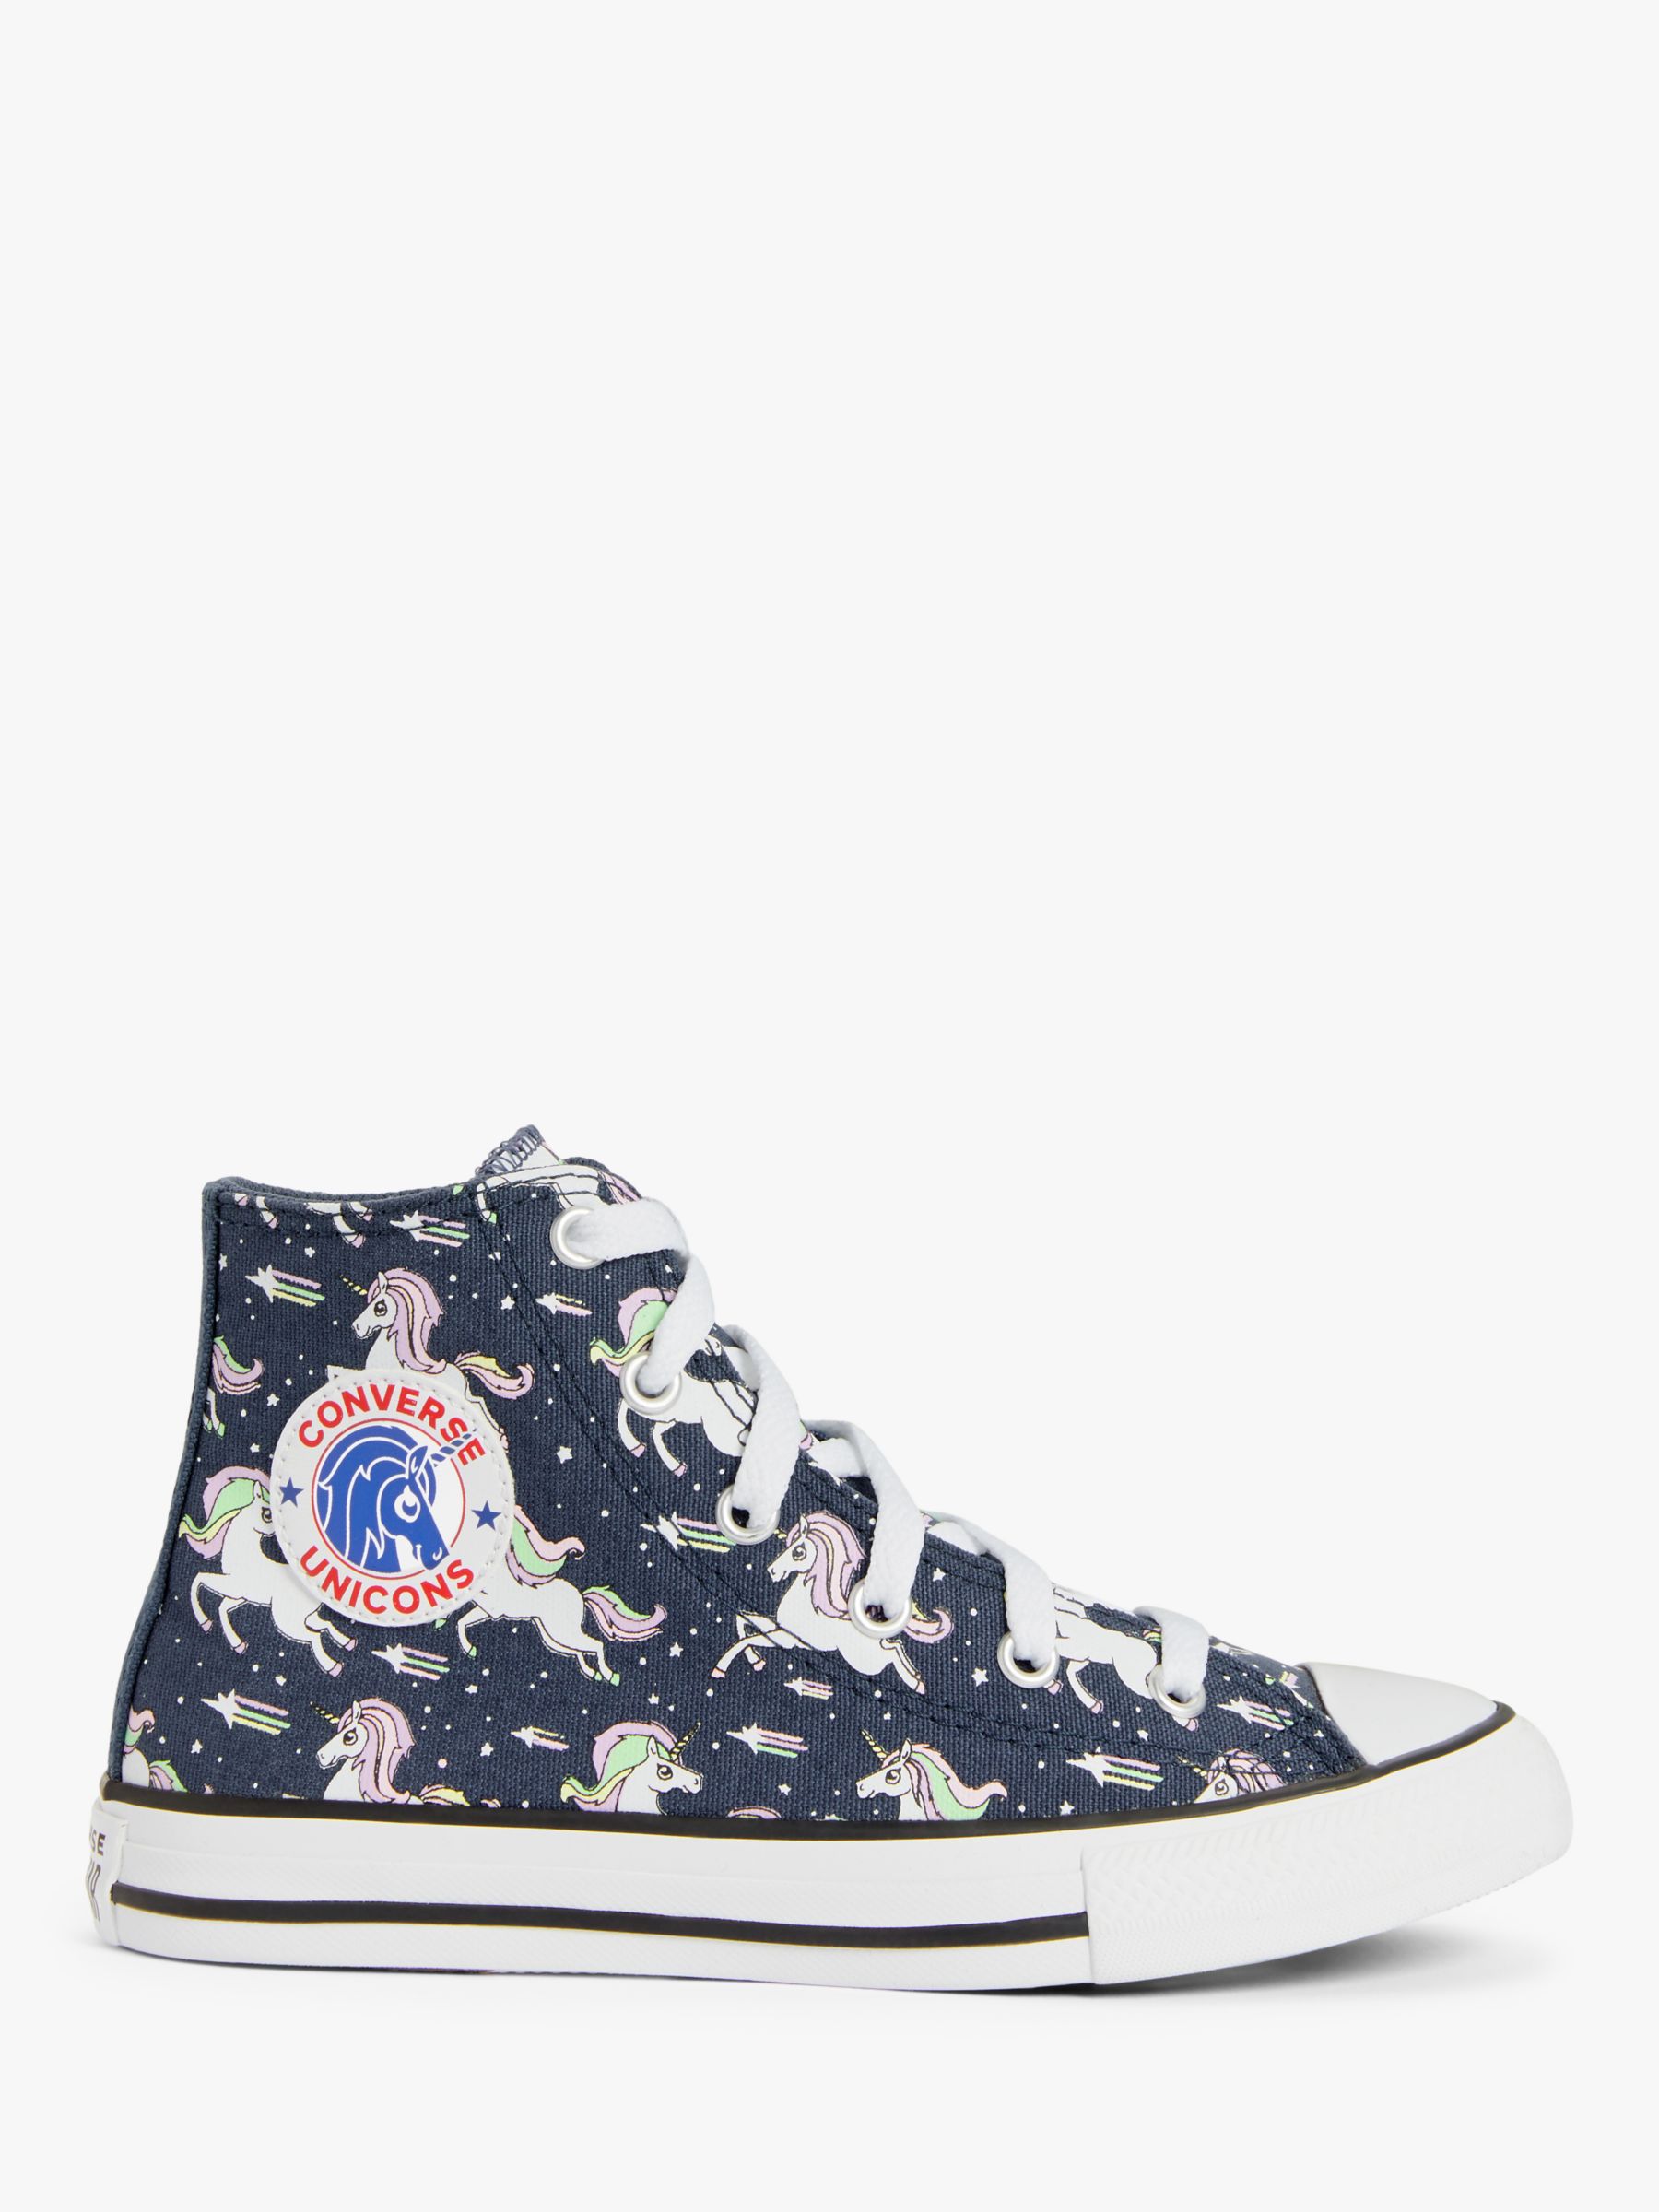 converse childrens navy all star trainers